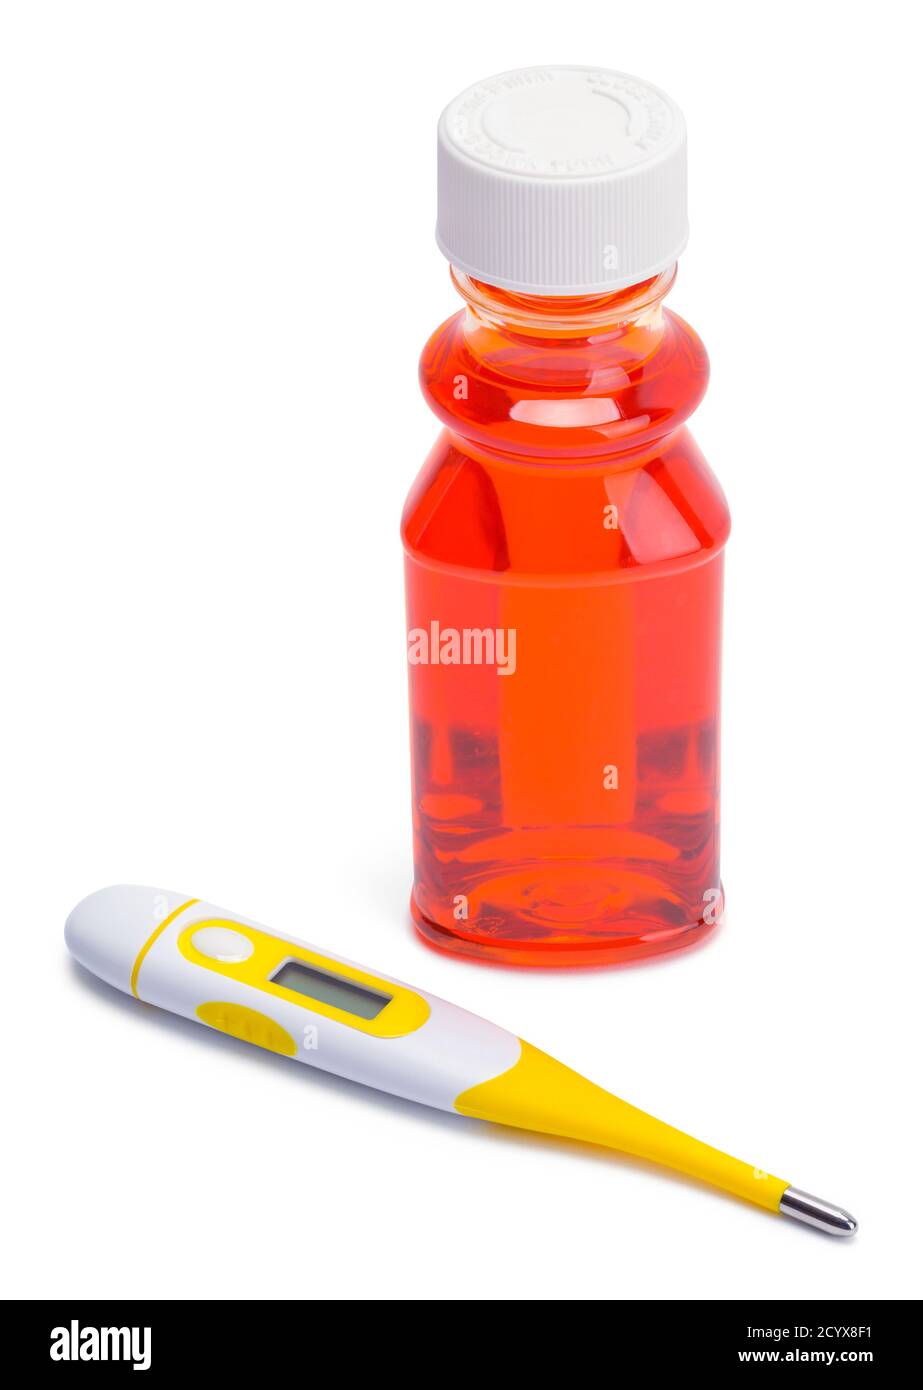 Bottle of Orange Medicine with Yellow Thermometer. Stock Photo